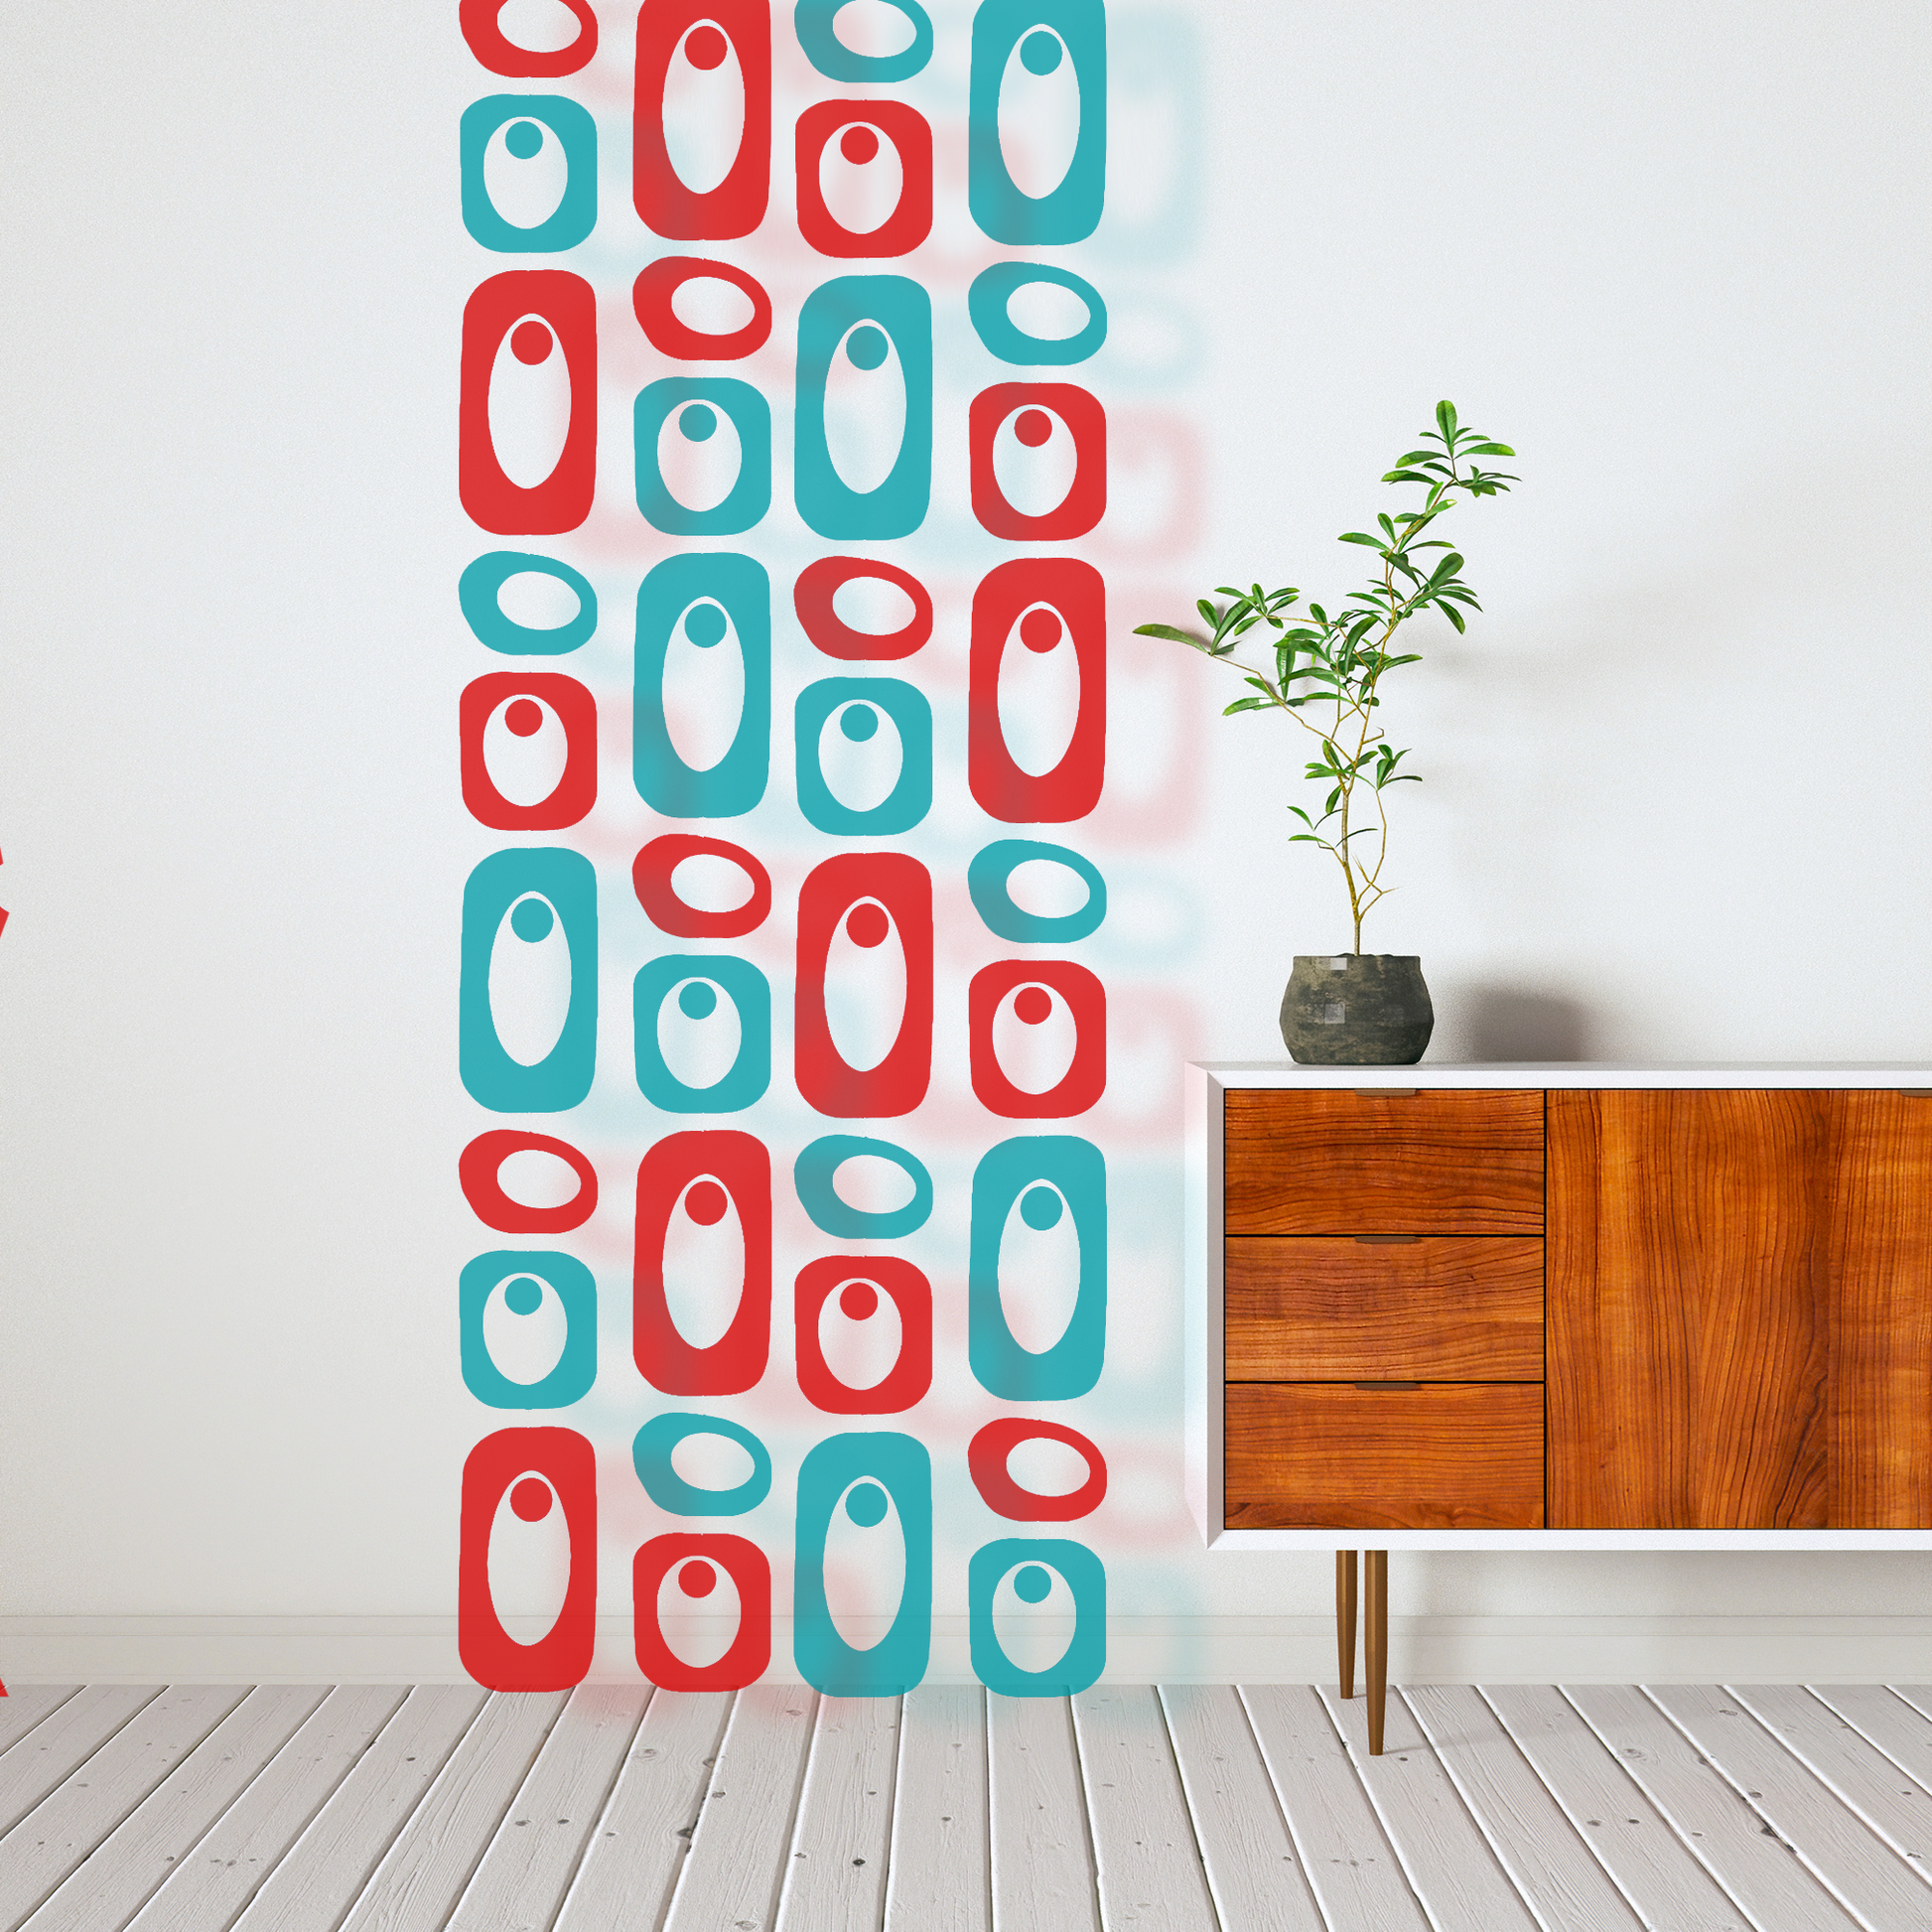 Clear Red and Teal acrylic retro room divider in 4 columns next to mid century modern wood sideboard credenza and plant - Beatnik Party Retro Room DIvider by AtomicMobiles.com